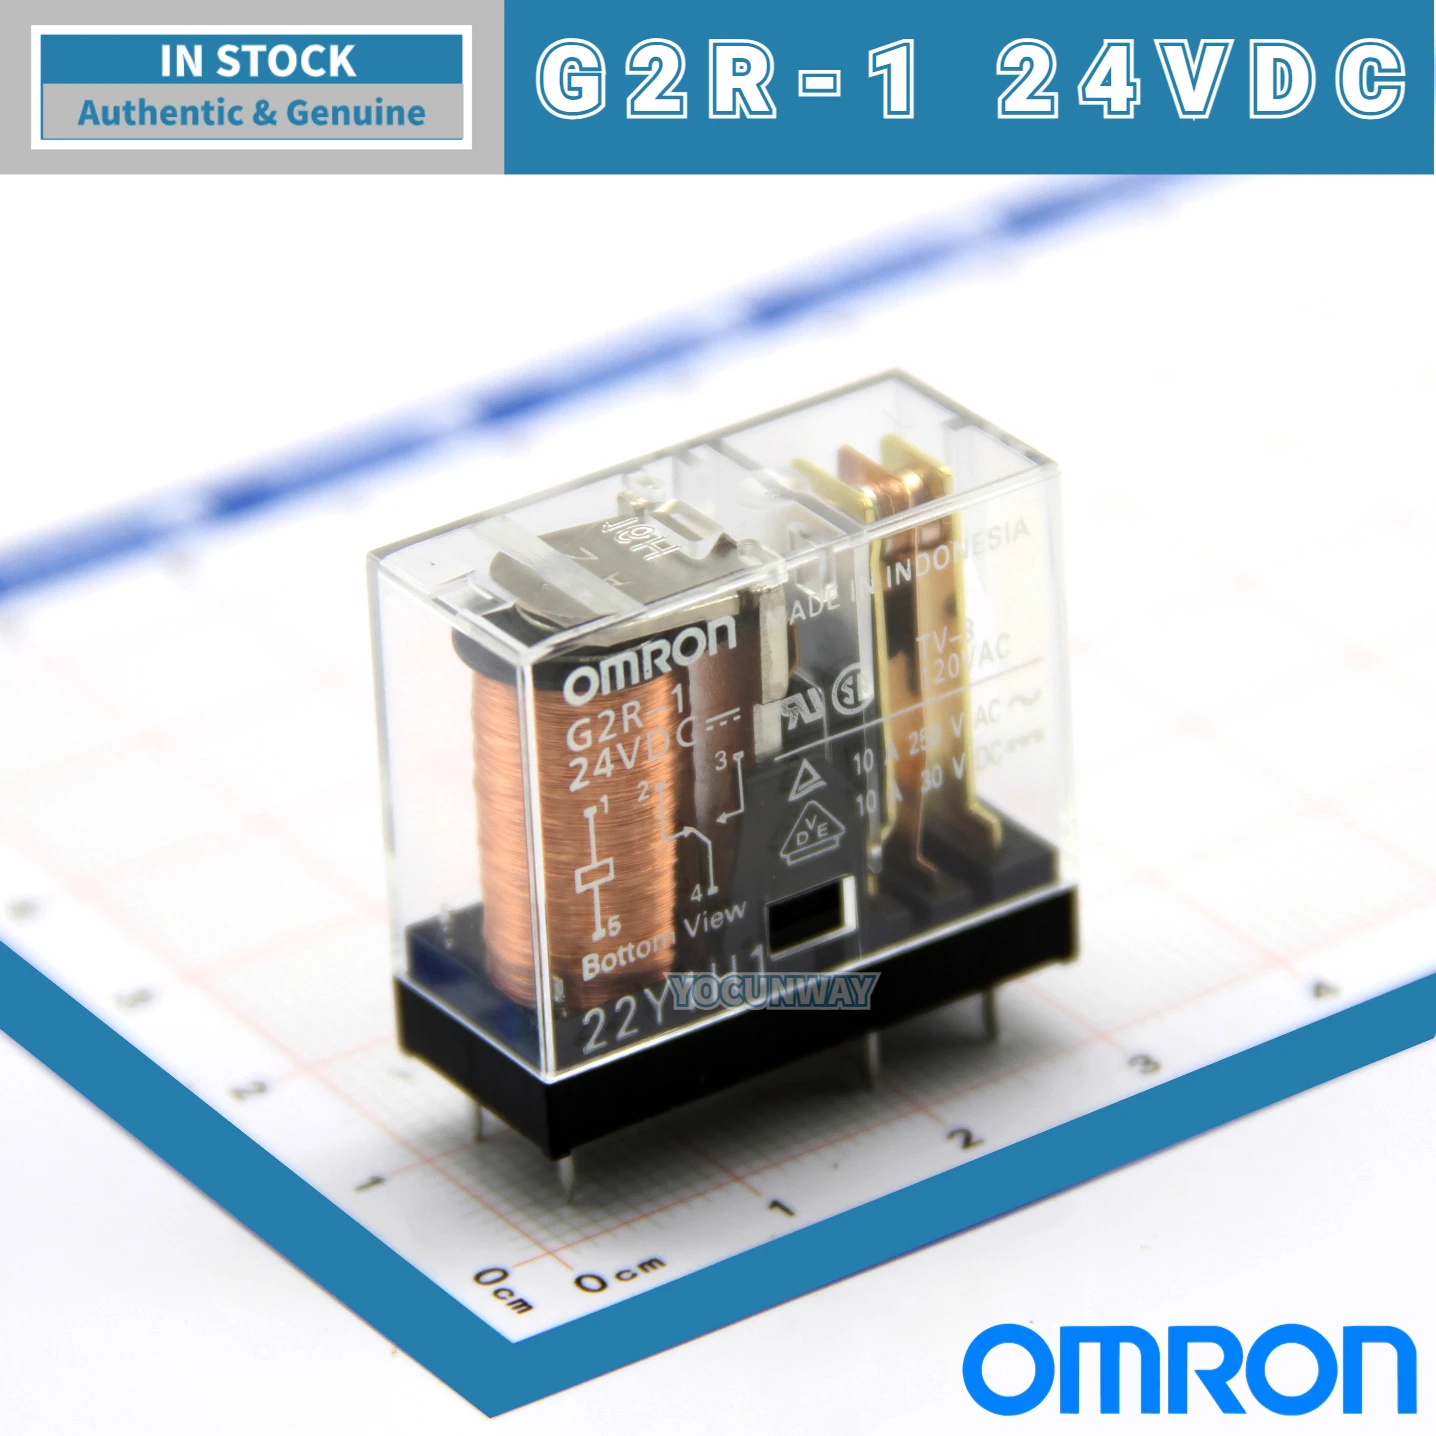 New Authentic Original OMRON PCB Power Relay G2R-1-1A-E 1-E 12VDC 24VDC DC5V 12V 110V 220V AC110V 220V 230V 5 PIN 10A